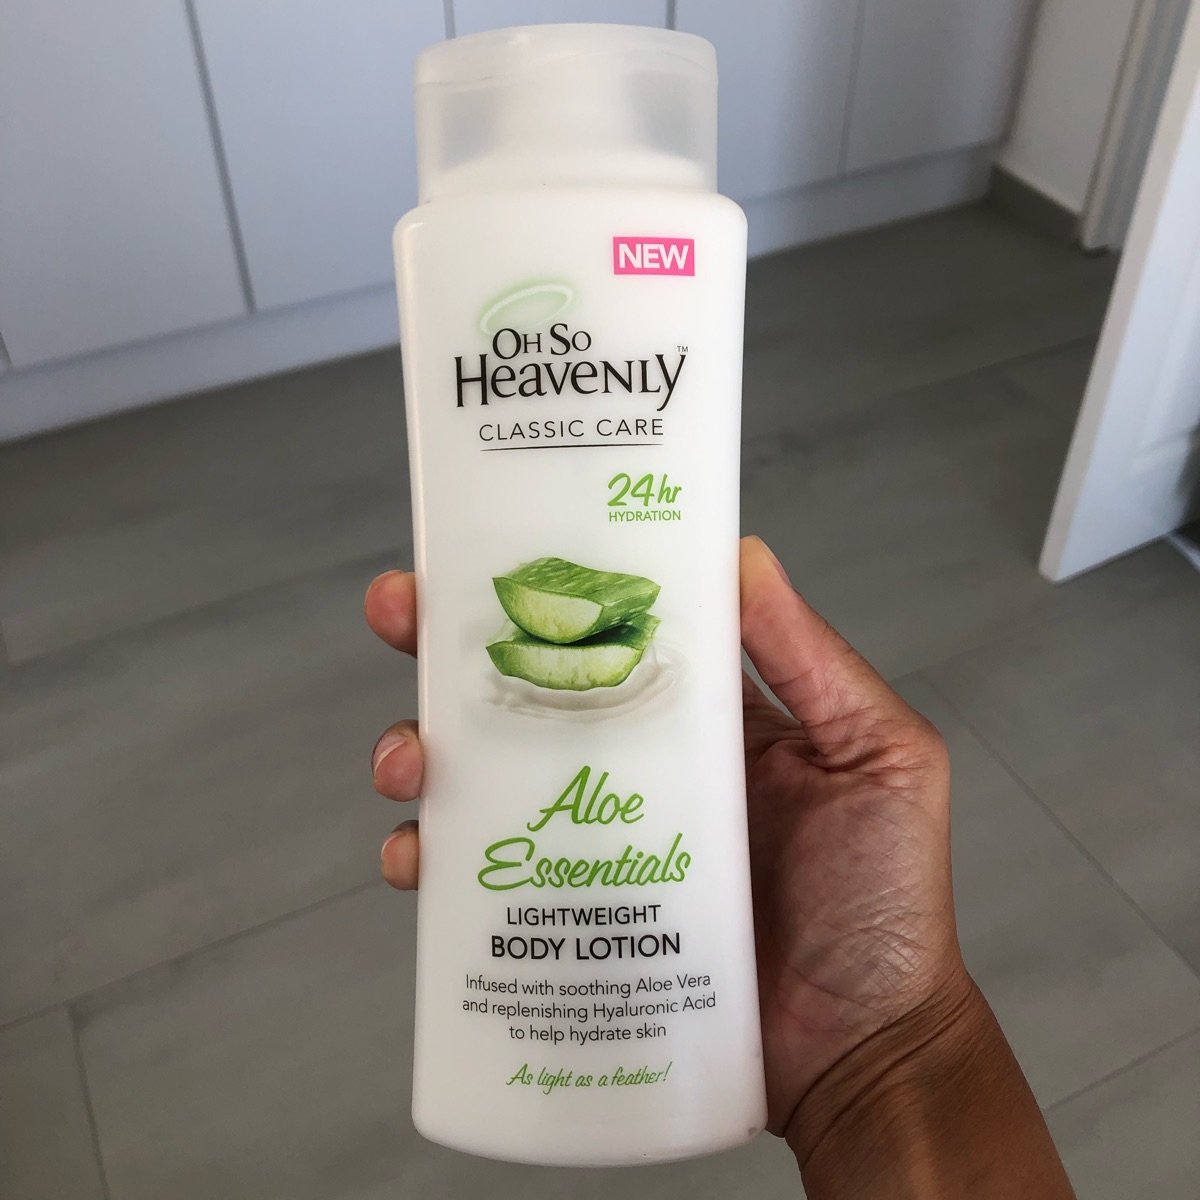 Oh So Heavenly Aloe Essentials Lightweight Body Lotion Reviews